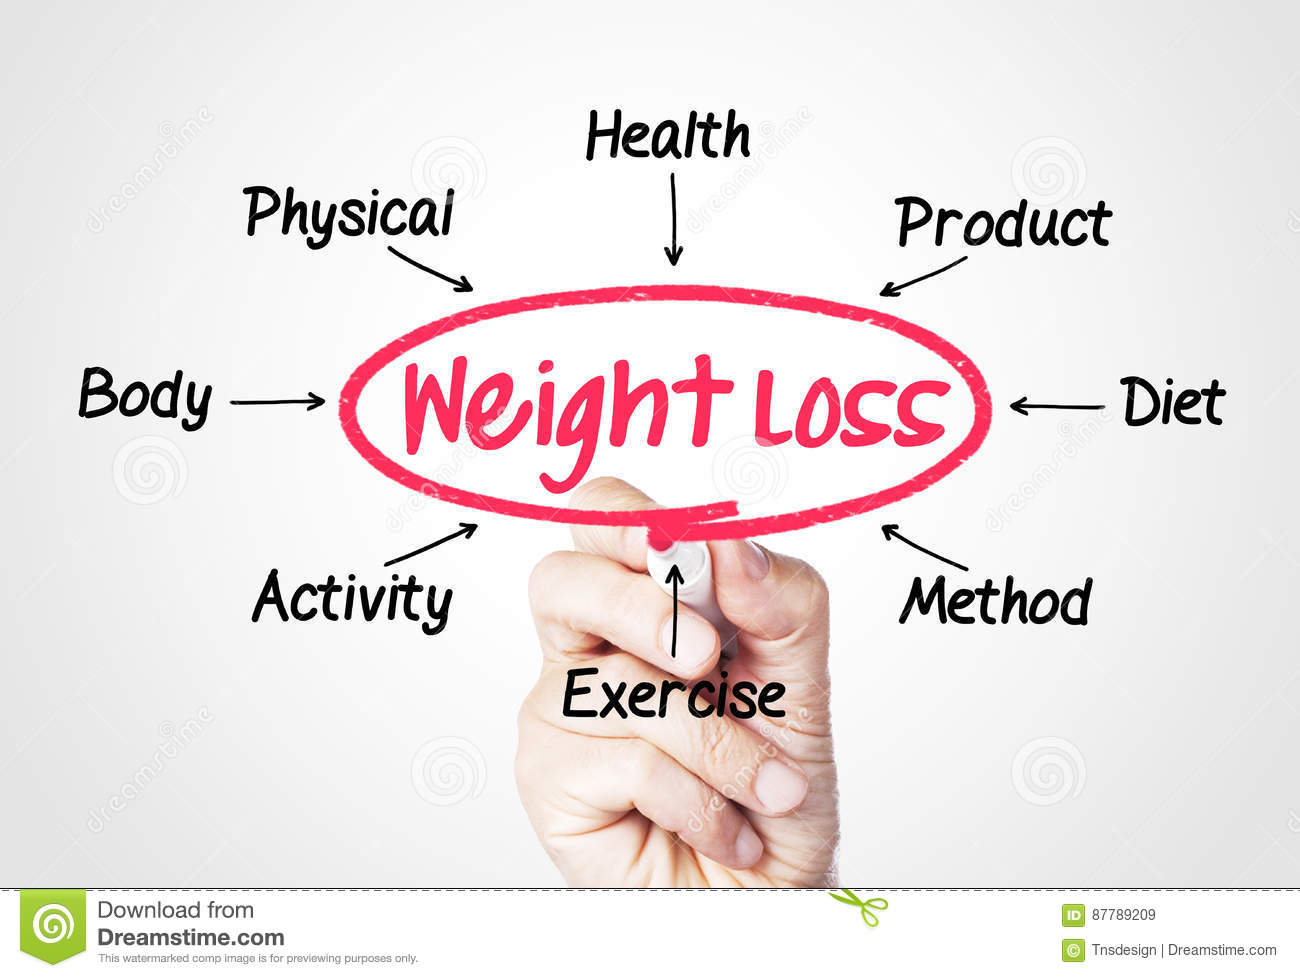 weight-loss-concept-sketched-screen-87789209.jpg